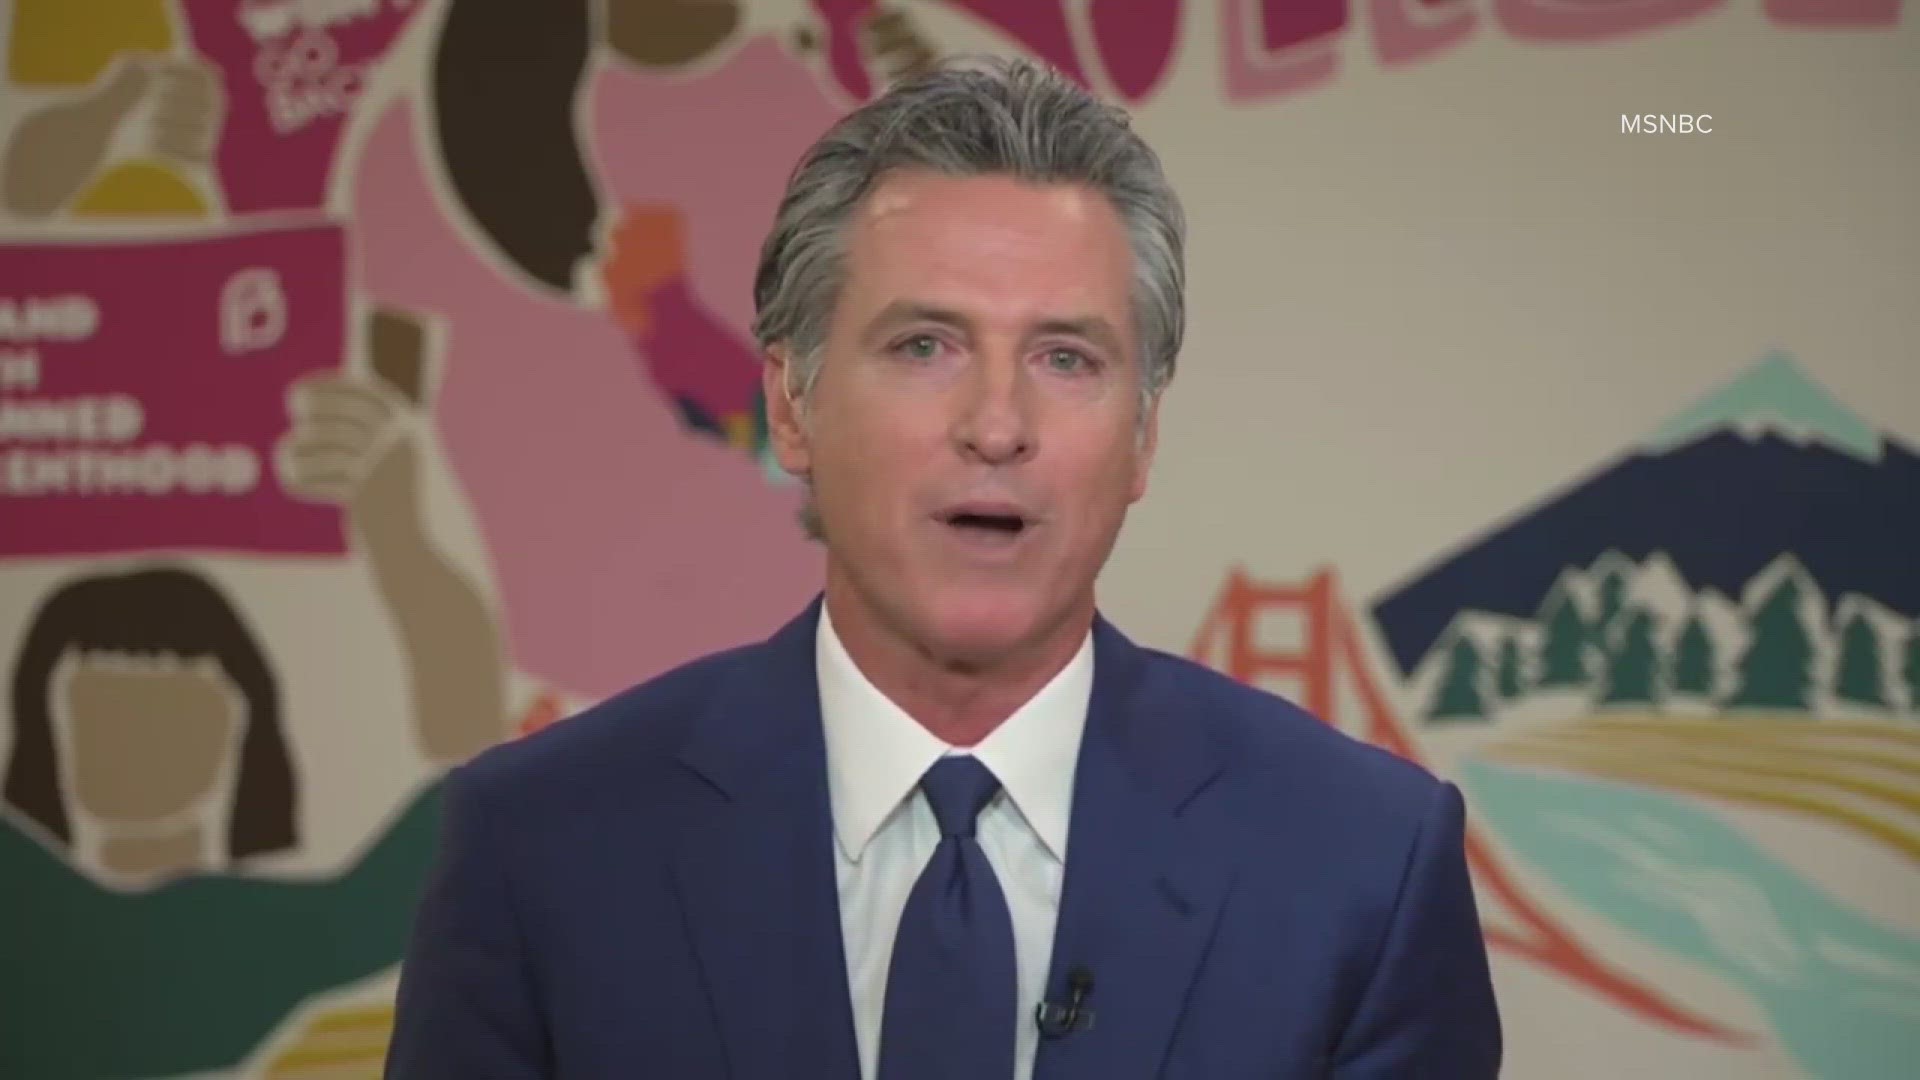 Gov. Gavin Newsom announced Sunday that he will propose emergency legislation this week in response to Arizona's abortion ban. Here are his plans.